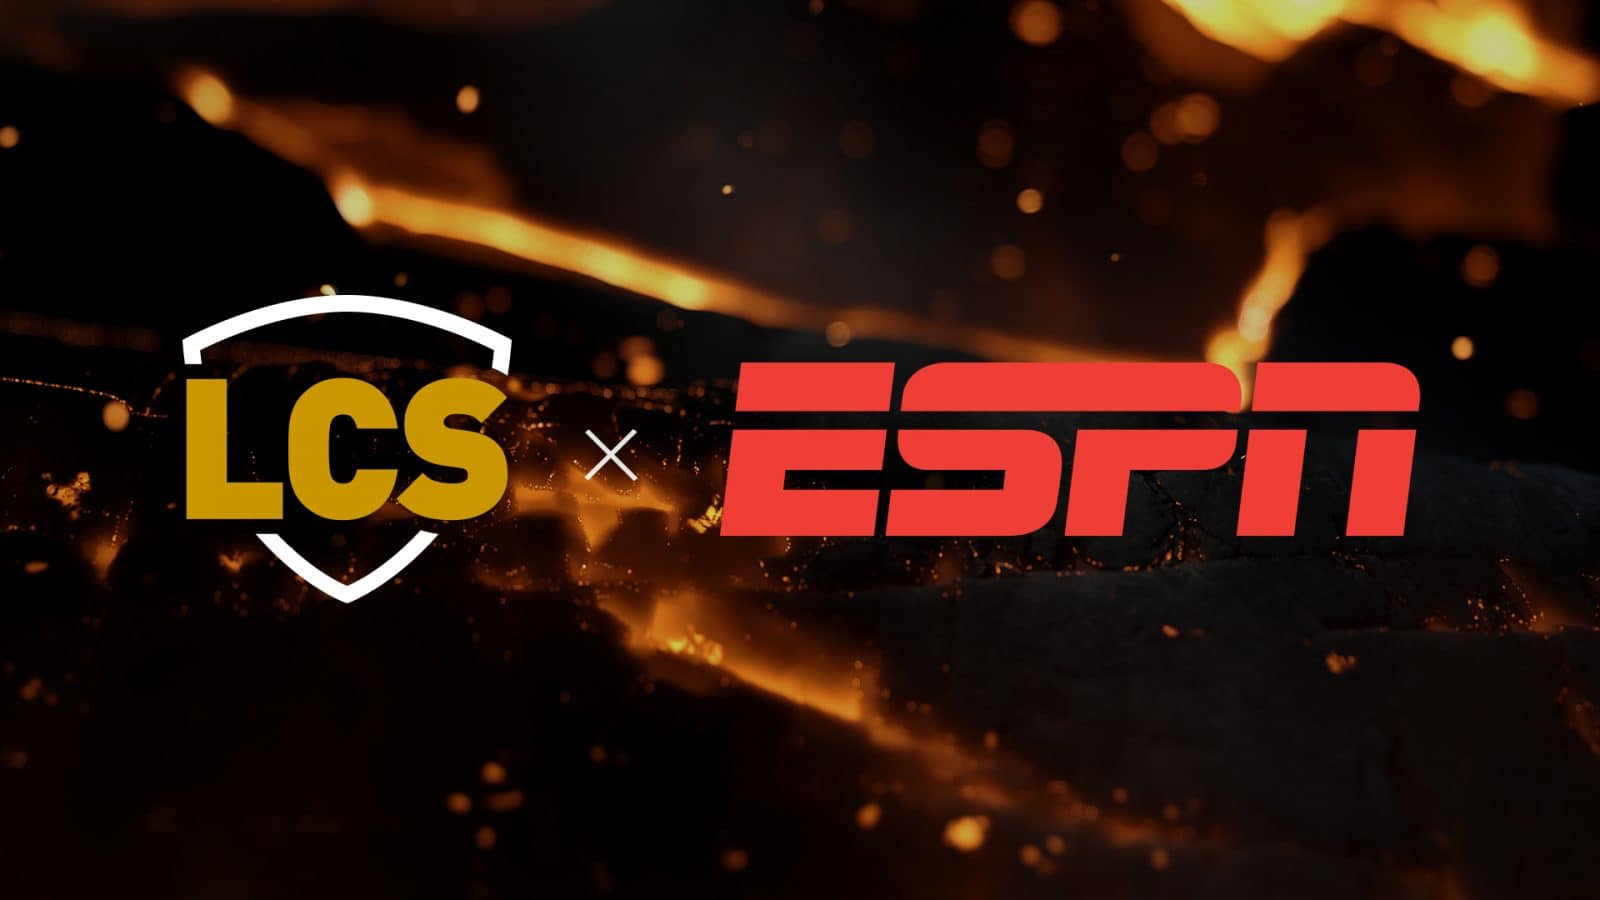 League of Legends: ESPN to Broadcast the LCS Playoffs and Finals